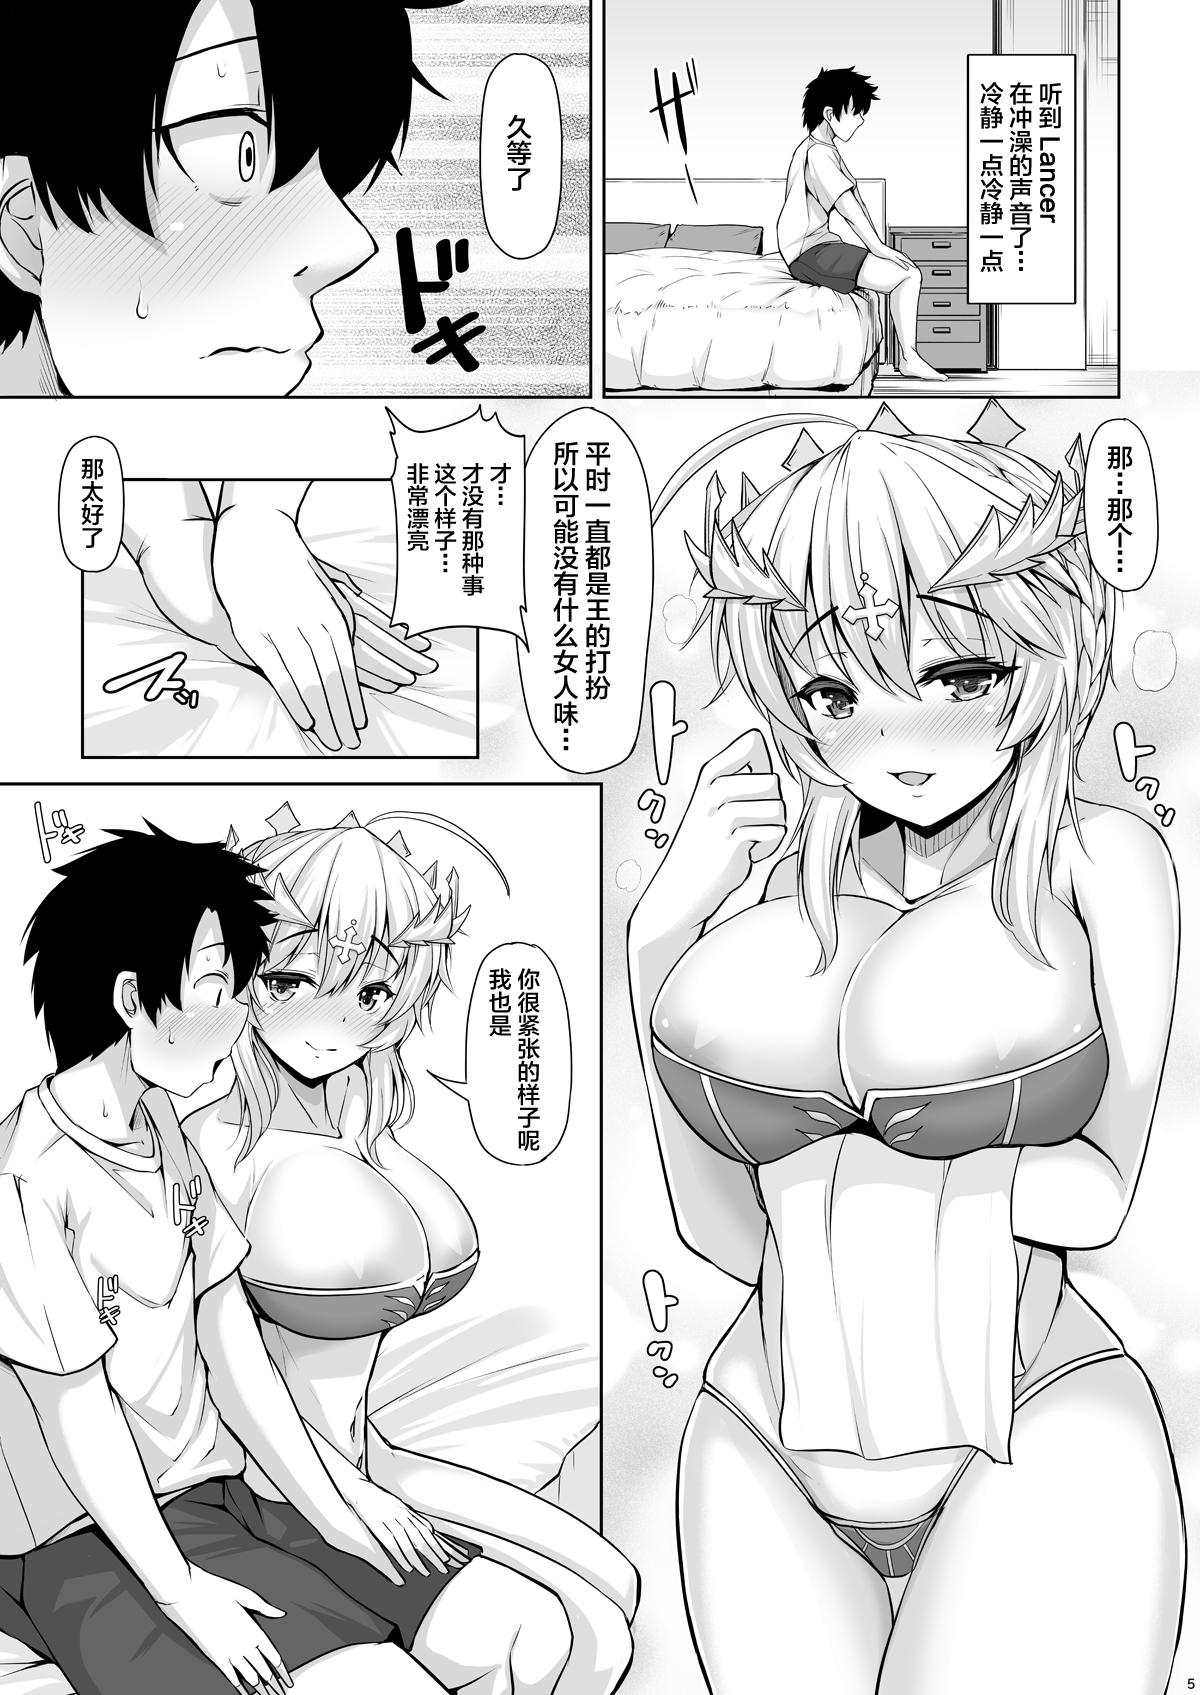 Smooth Kishiou-sama datte Amaetai - Fate grand order Tight Cunt - Page 4